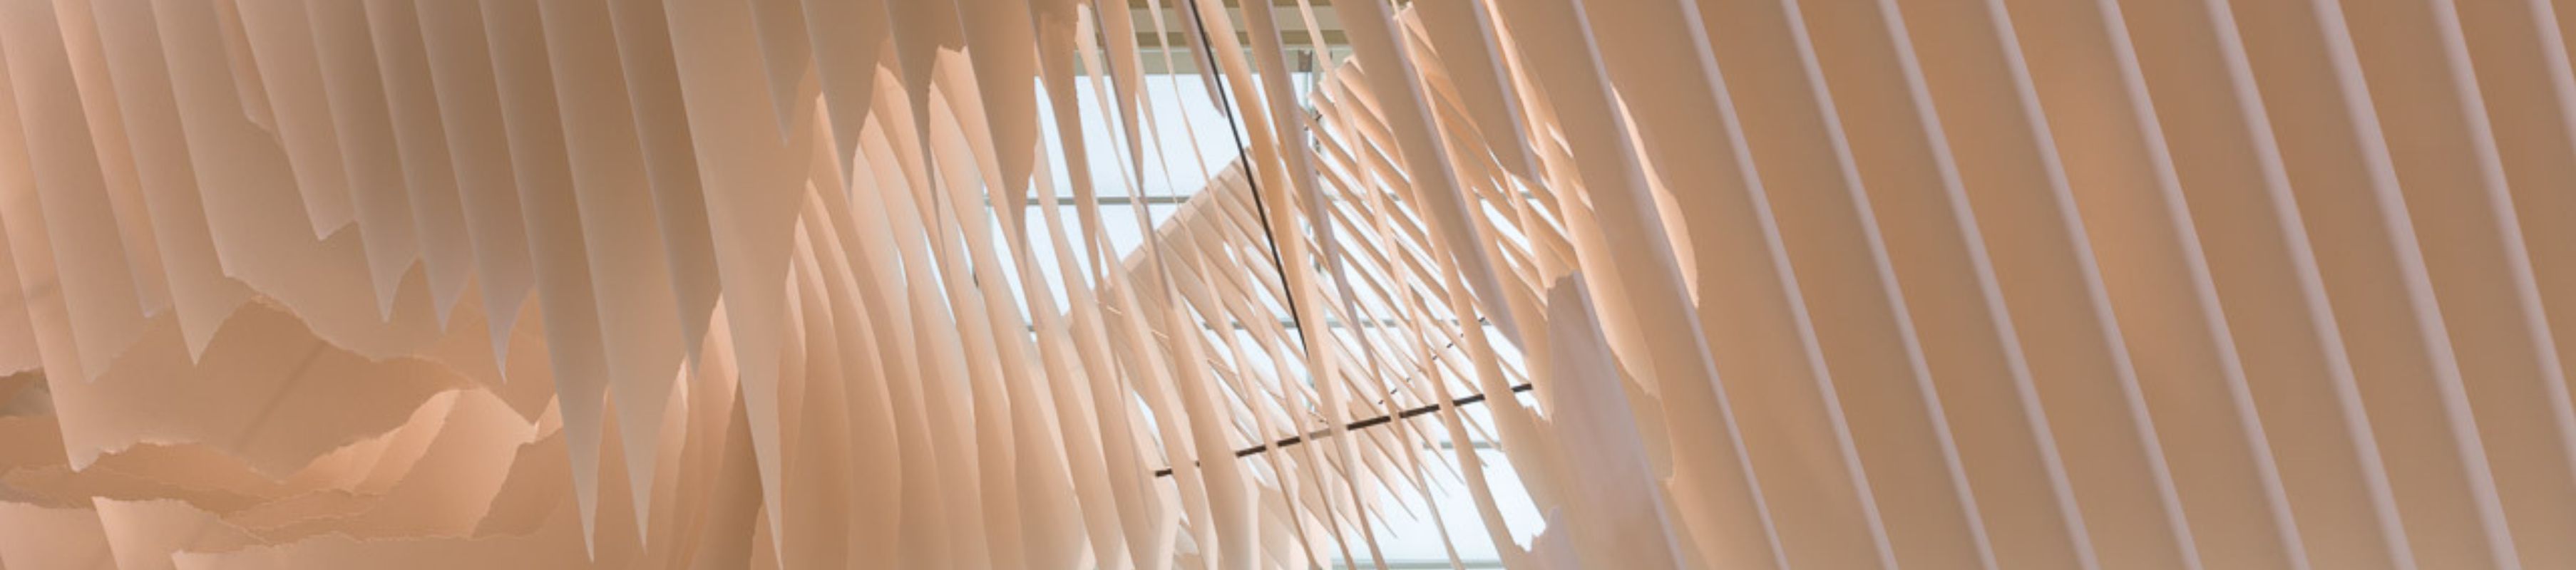 detail of Project Atrium: Angela Glajcar, which featured sheets of natural paper hanging from the ceiling